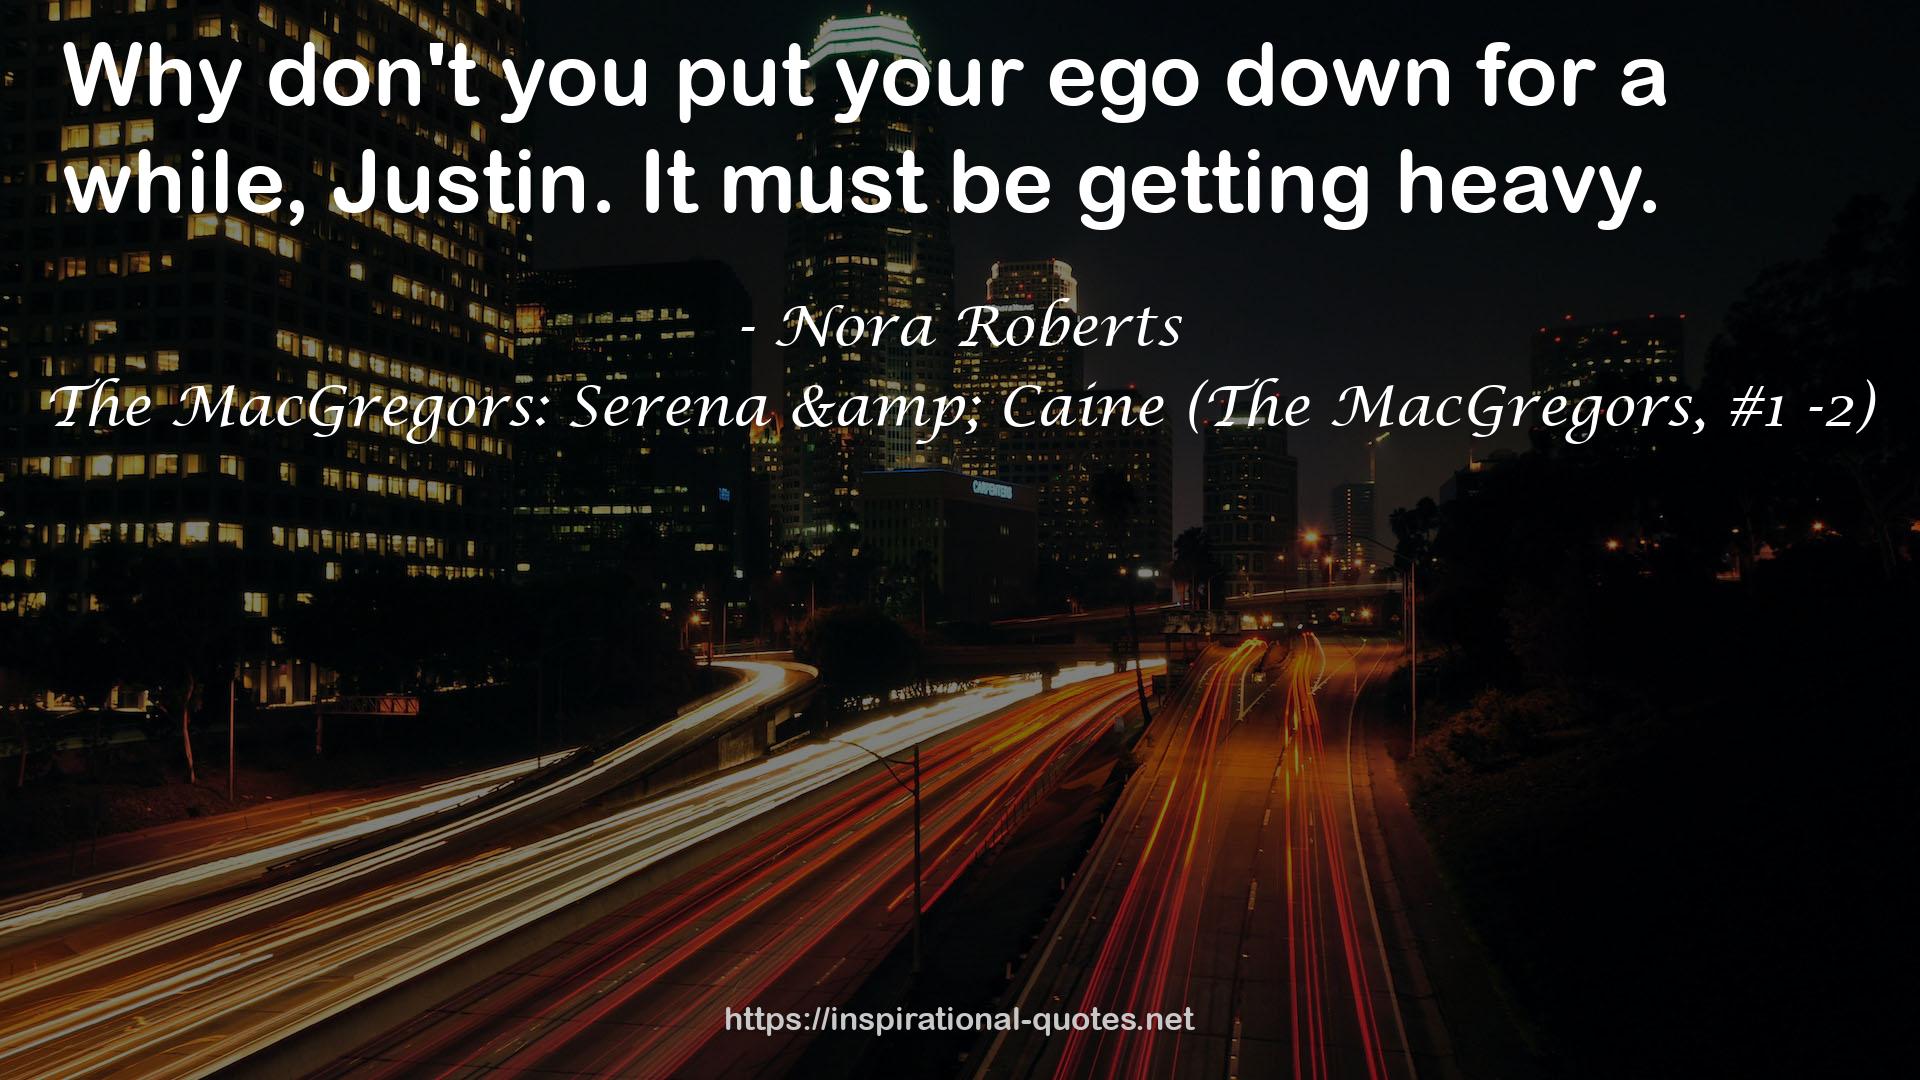 The MacGregors: Serena & Caine (The MacGregors, #1 -2) QUOTES